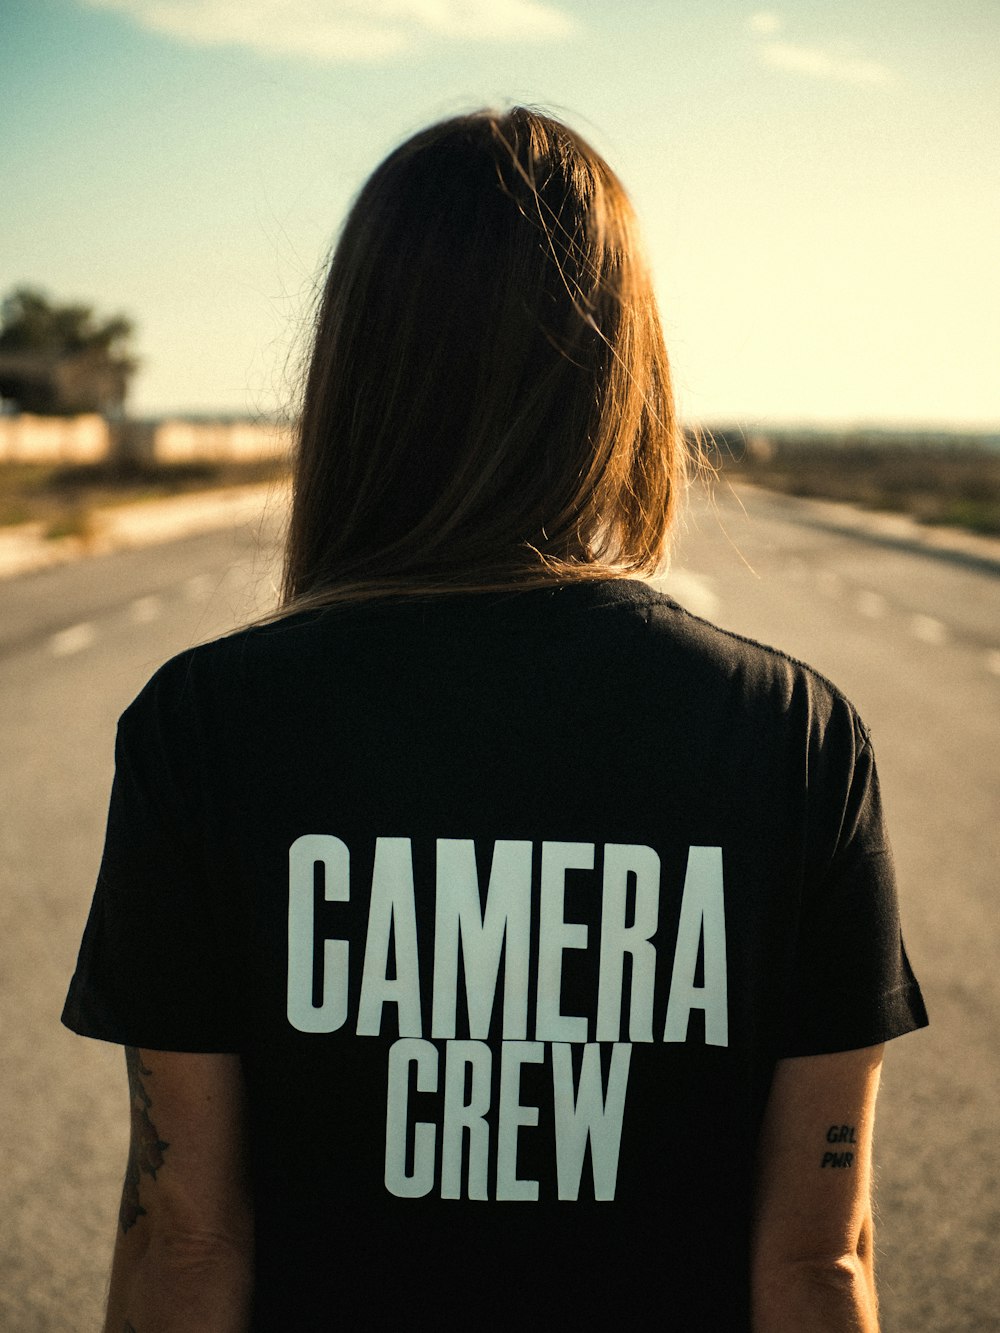 woman in black and white t-shirt standing on road during daytime